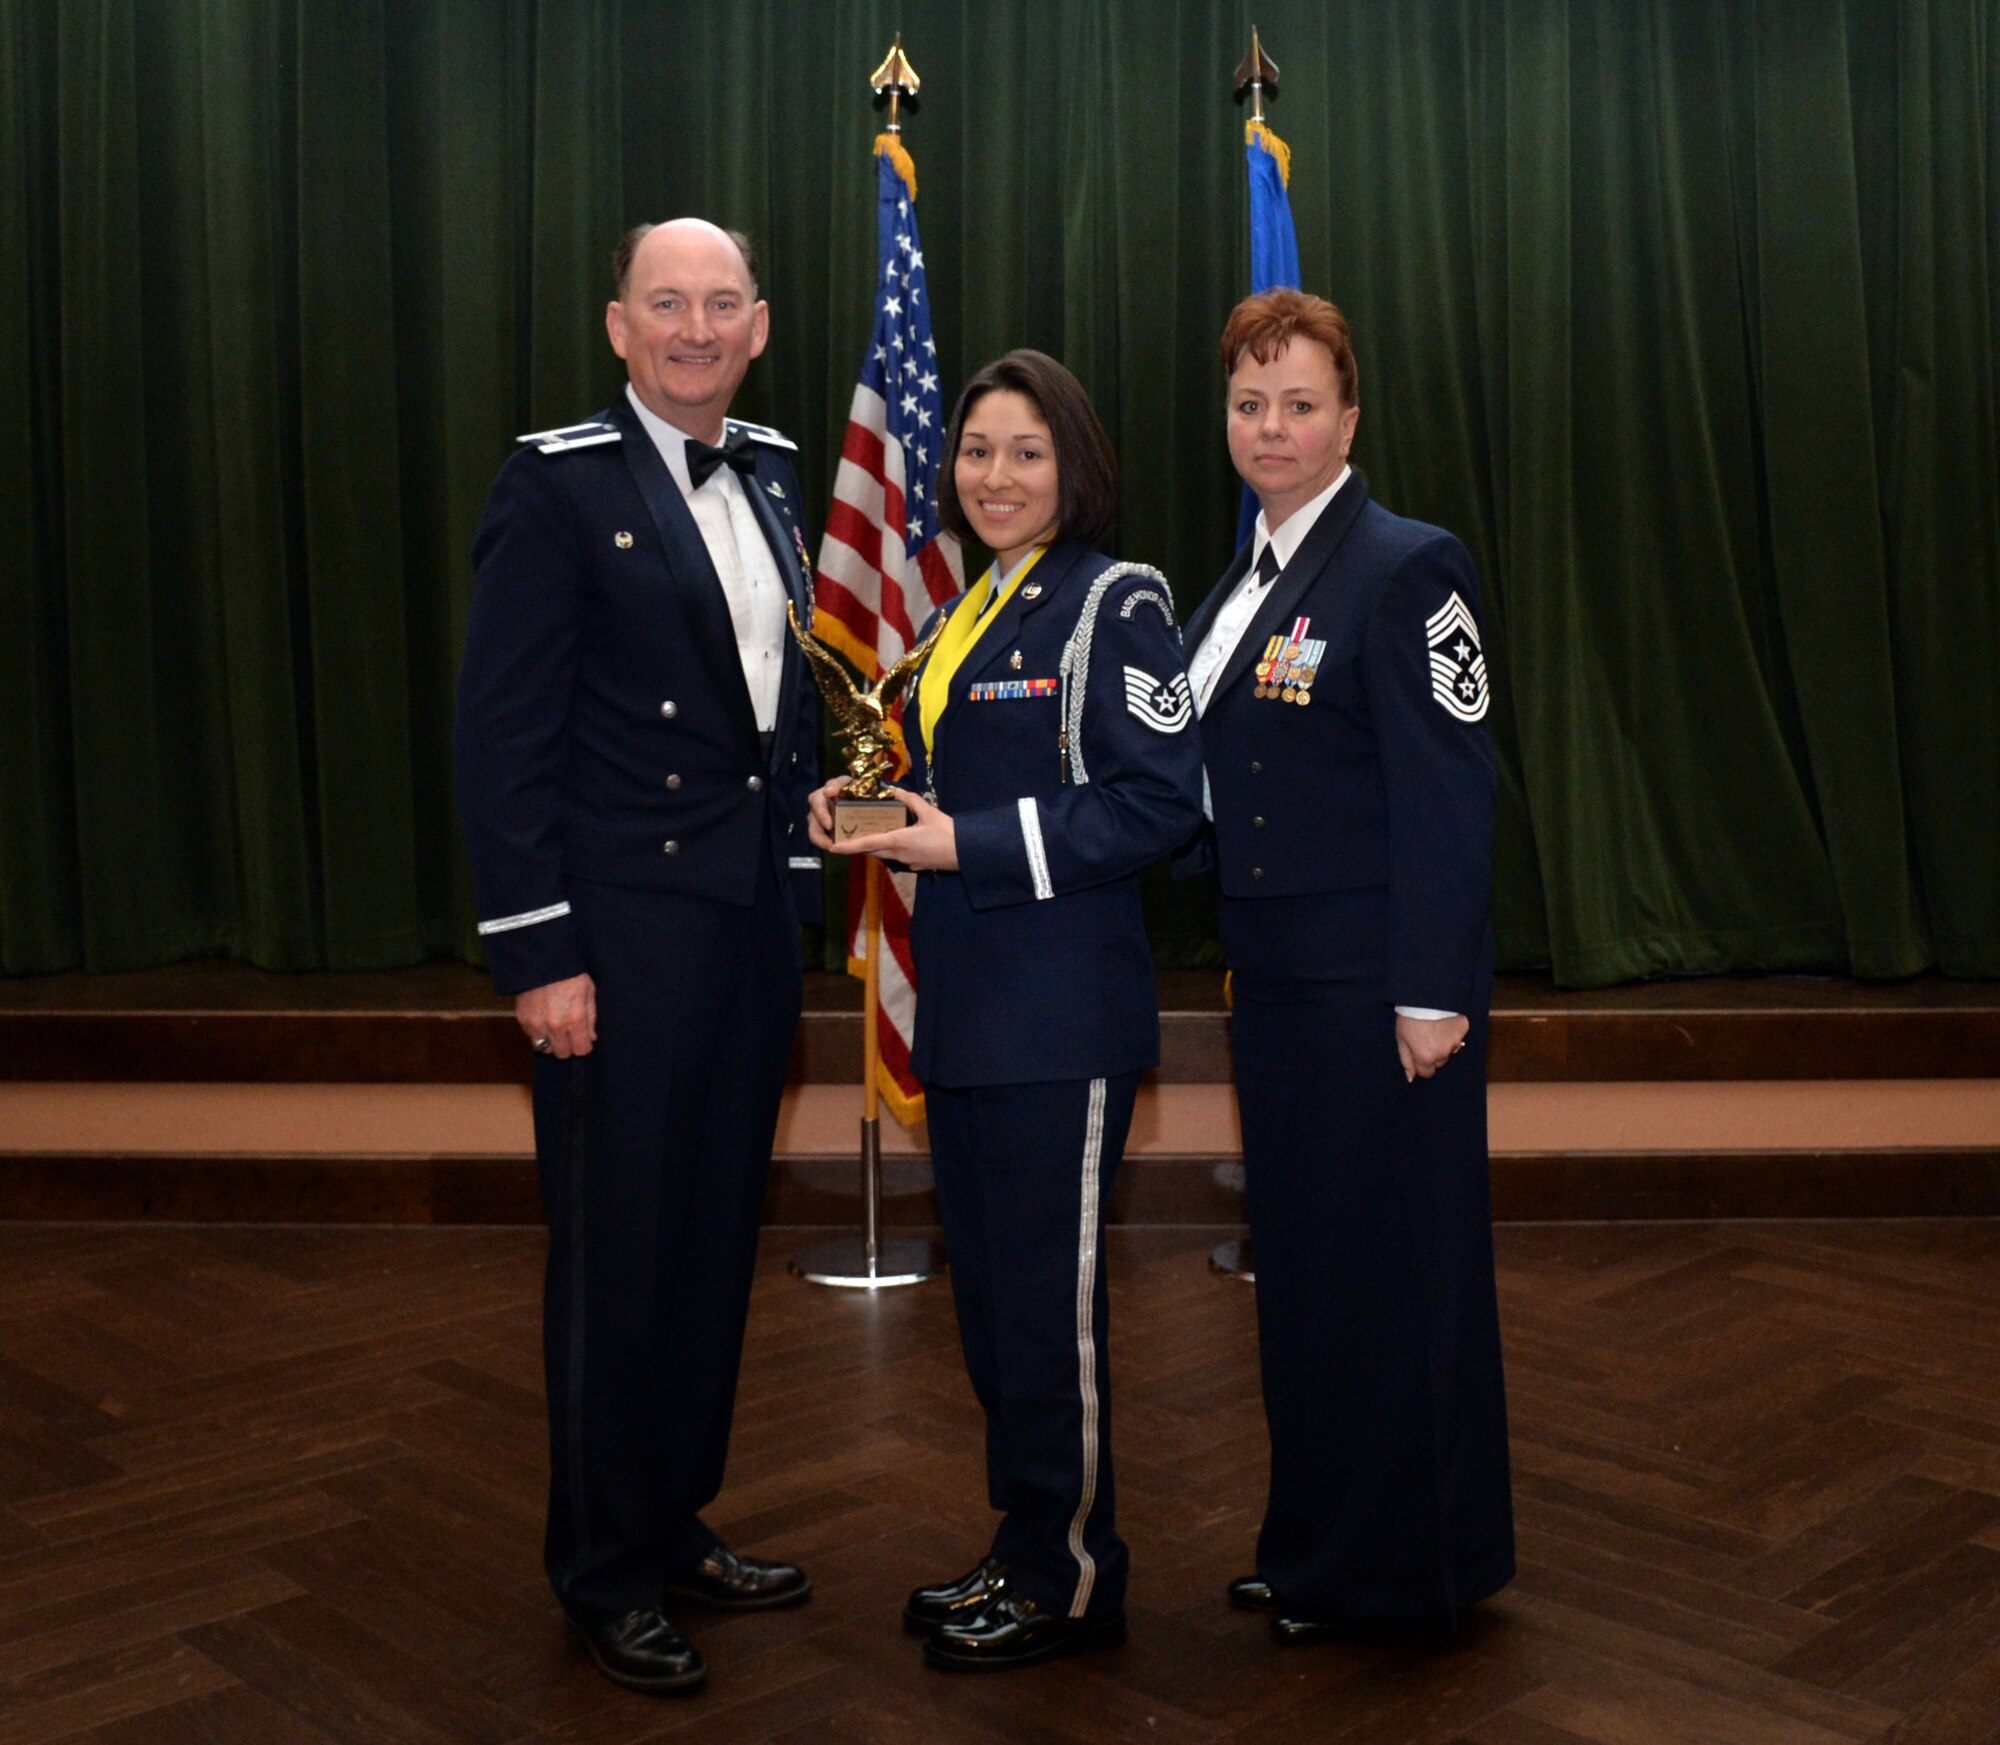 Col. Thomas K. Smith, 433rd Airlift Wing commander, and 433rd AW Command Chief Master Sgt. Shana C. Cullum, award Tech. Sgt. Stephanie Escobedo, 433rd Aerospace Medicine Squadron, as the Honor Guard Member of the Year at the 433rd AW annual awards banquet at Joint Base San Antonio-Lackland, Texas Feb. 9, 2019.